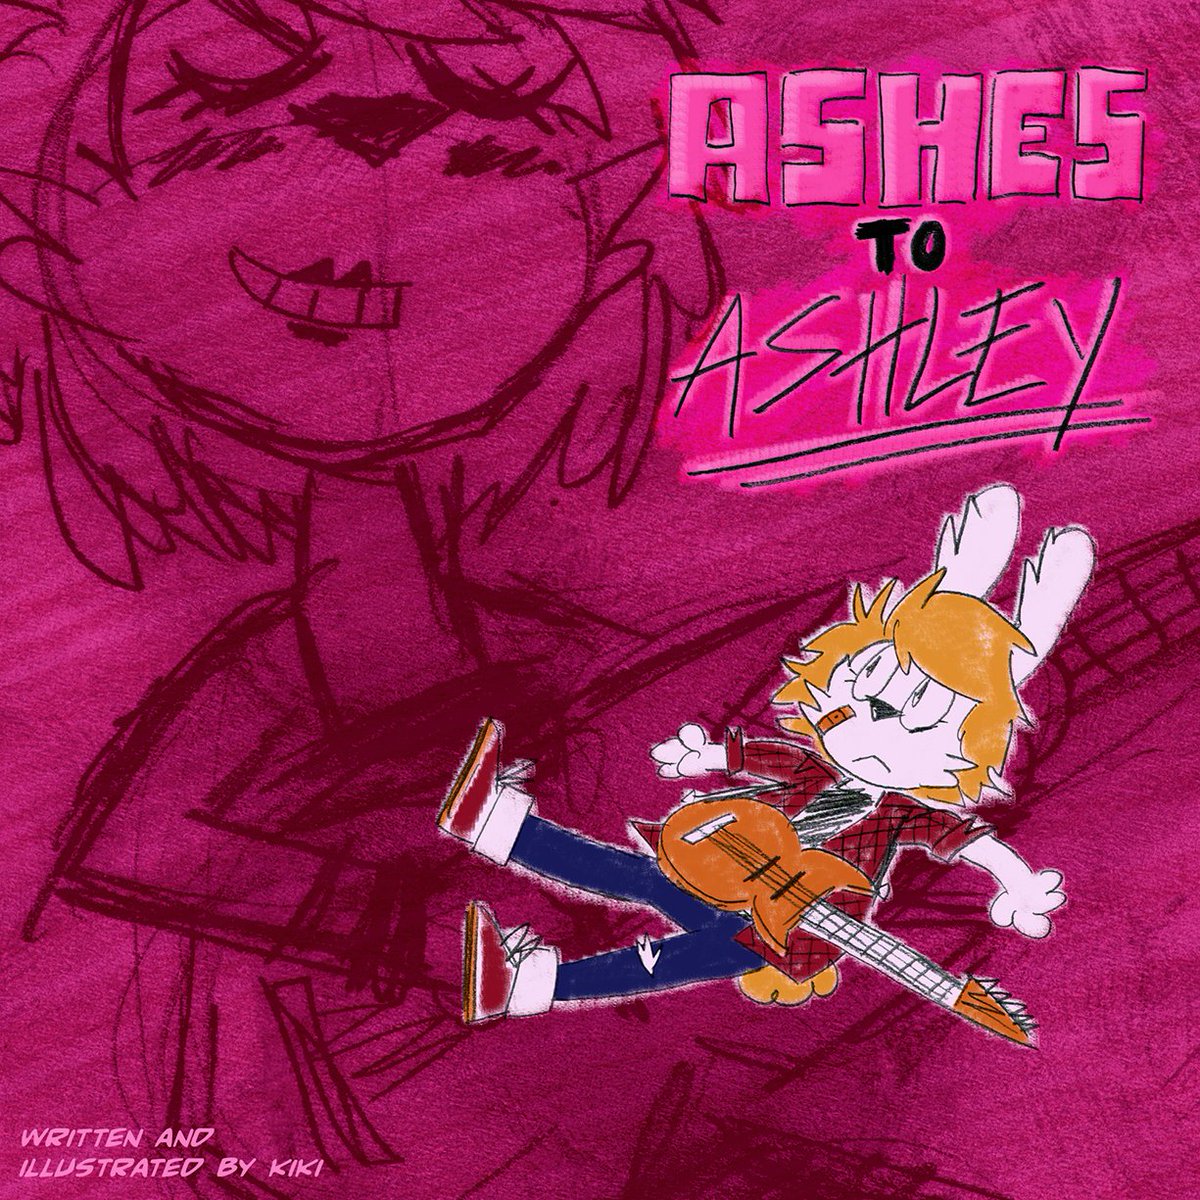 Kiki has been hard at work the last month making Ashes to Ashley, a cute comic about shoegaze and gender.
🧵(1/14)